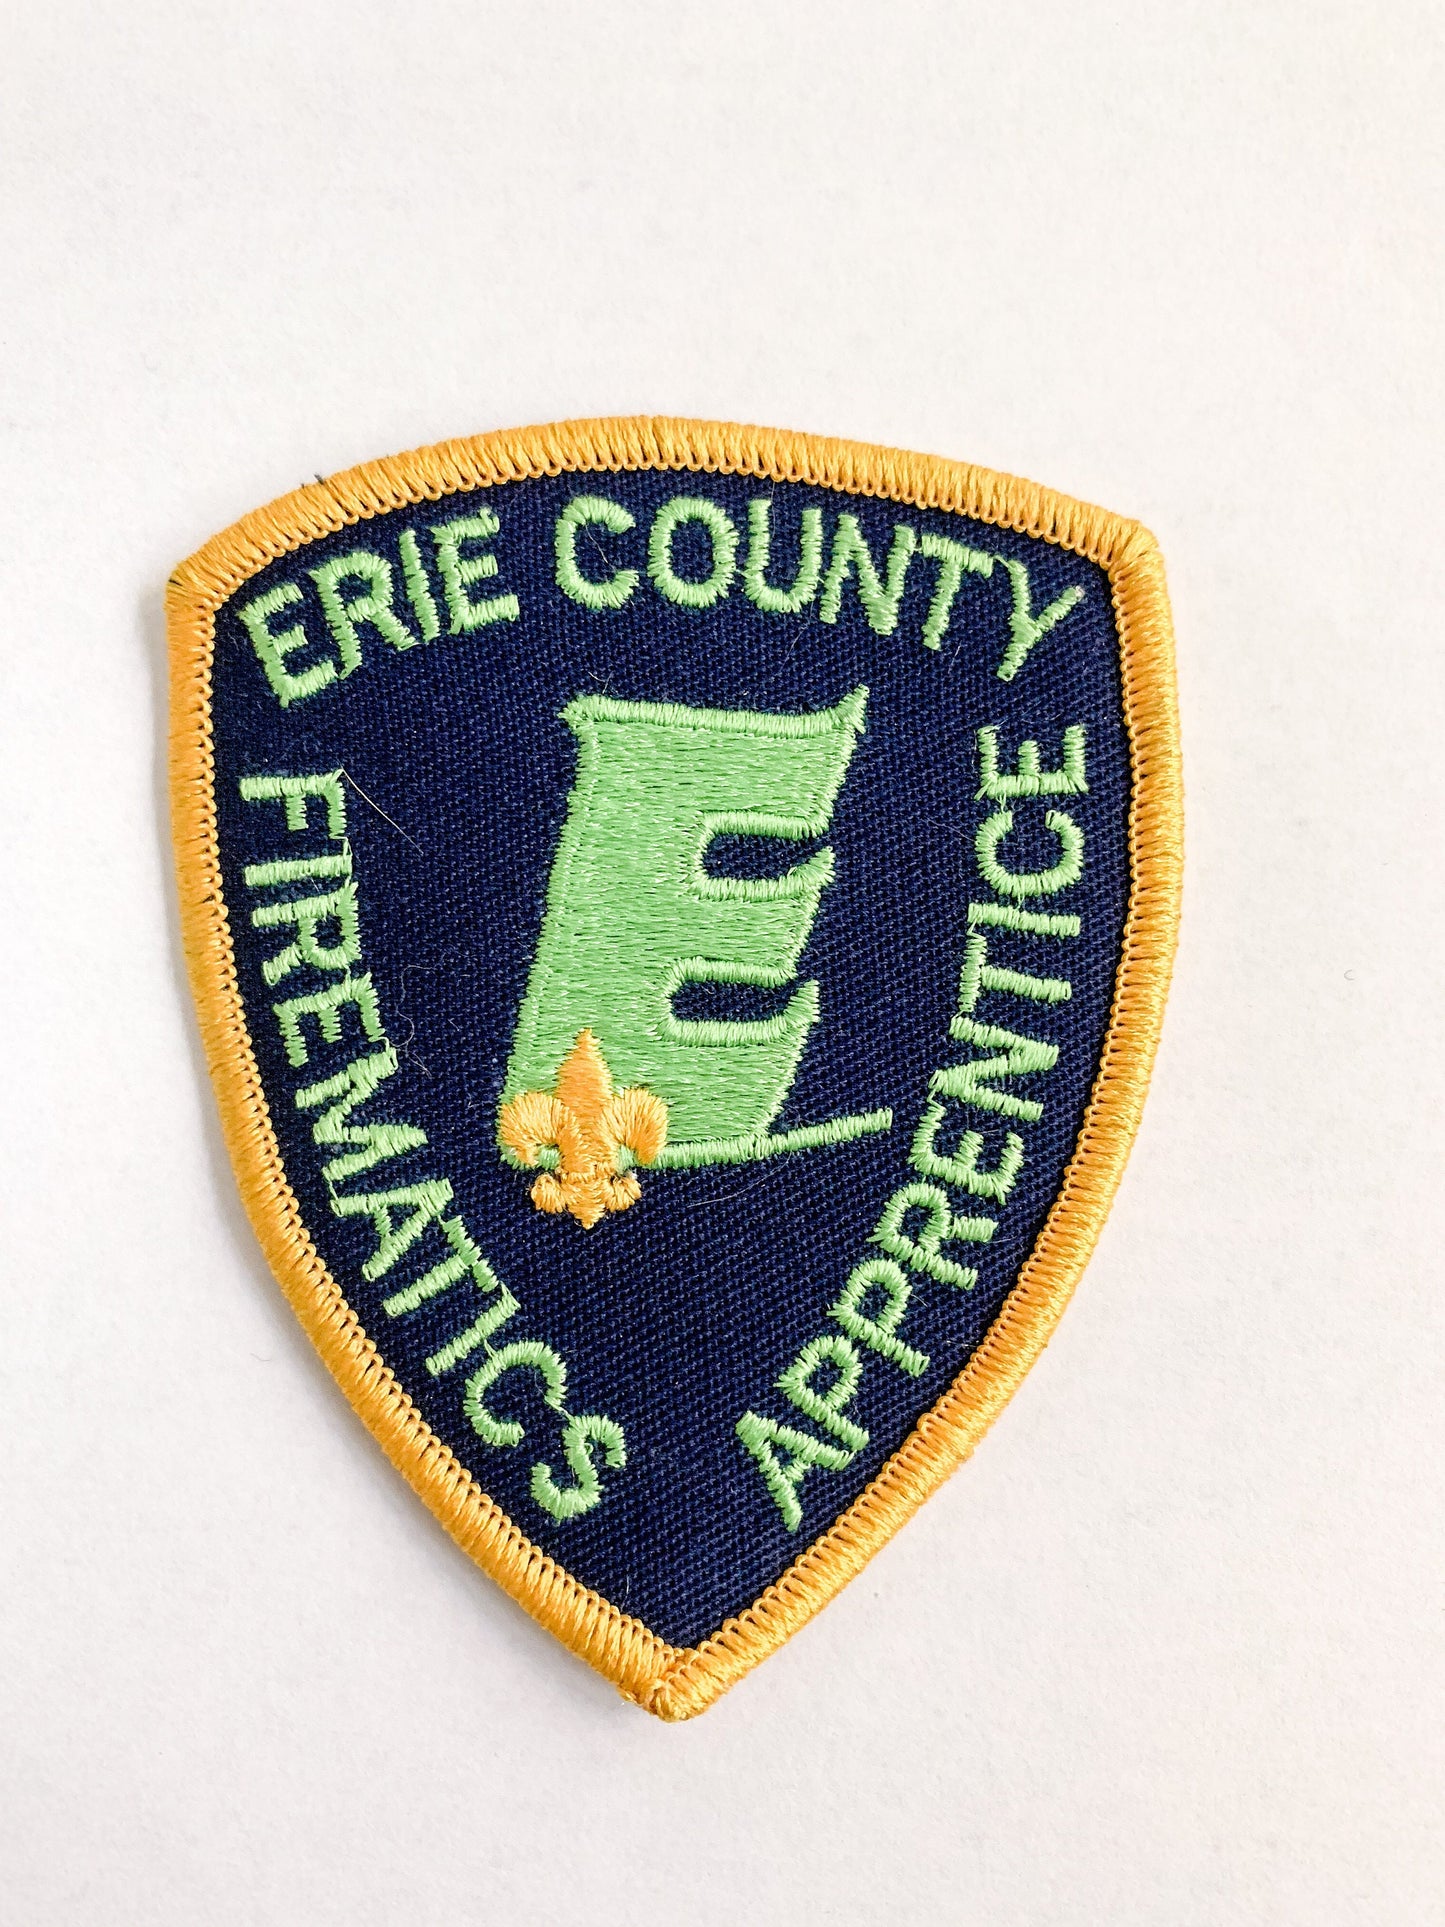 Erie County Firematics Apprentice Iron-on Vintage Patch